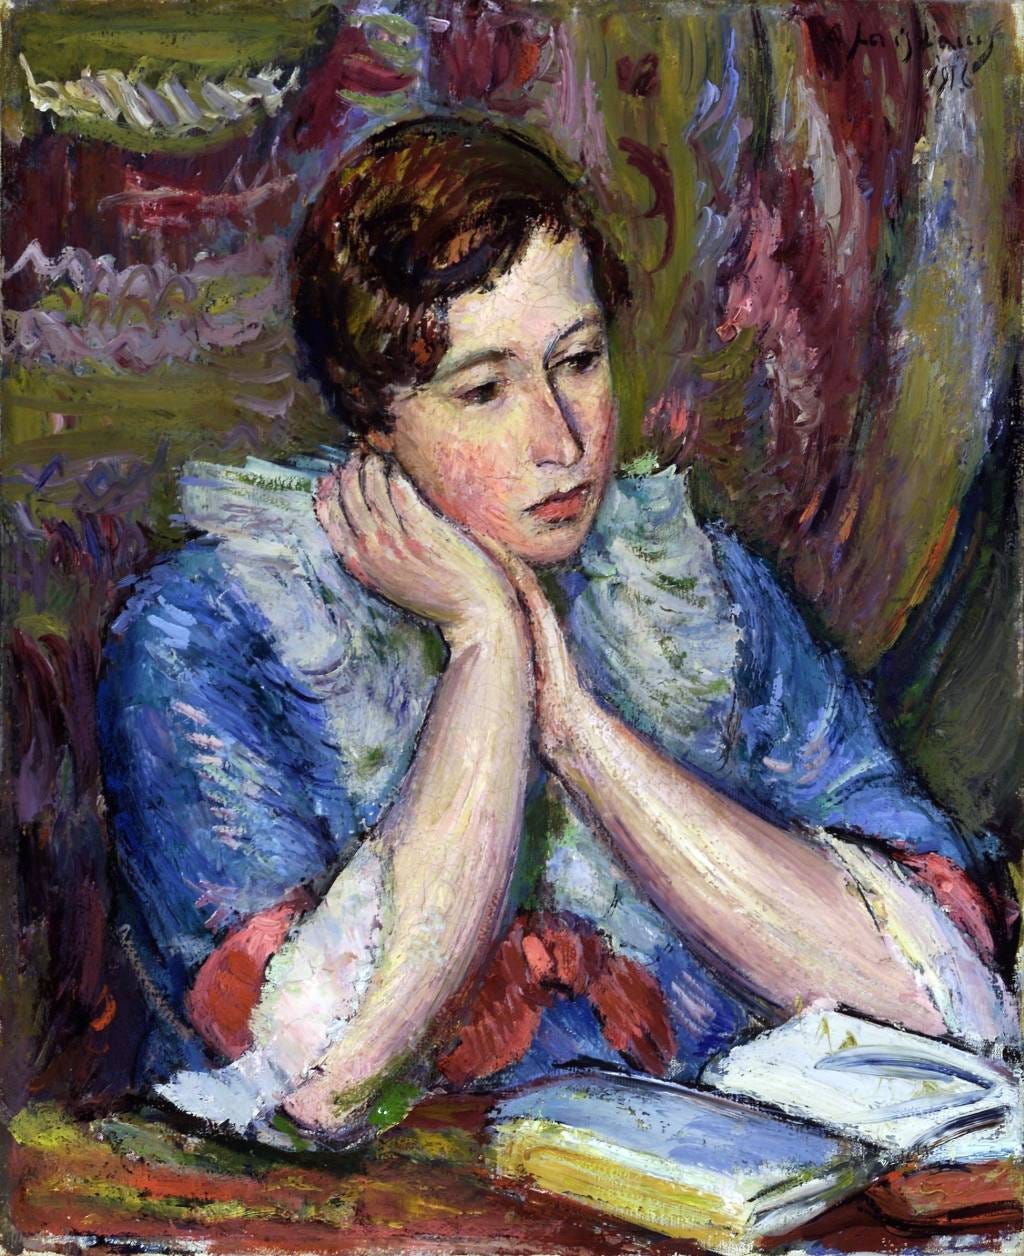 Colorful, late Impressionist-style painting of a woman sitting with a book open in front of her and a thoughtful expression on her face